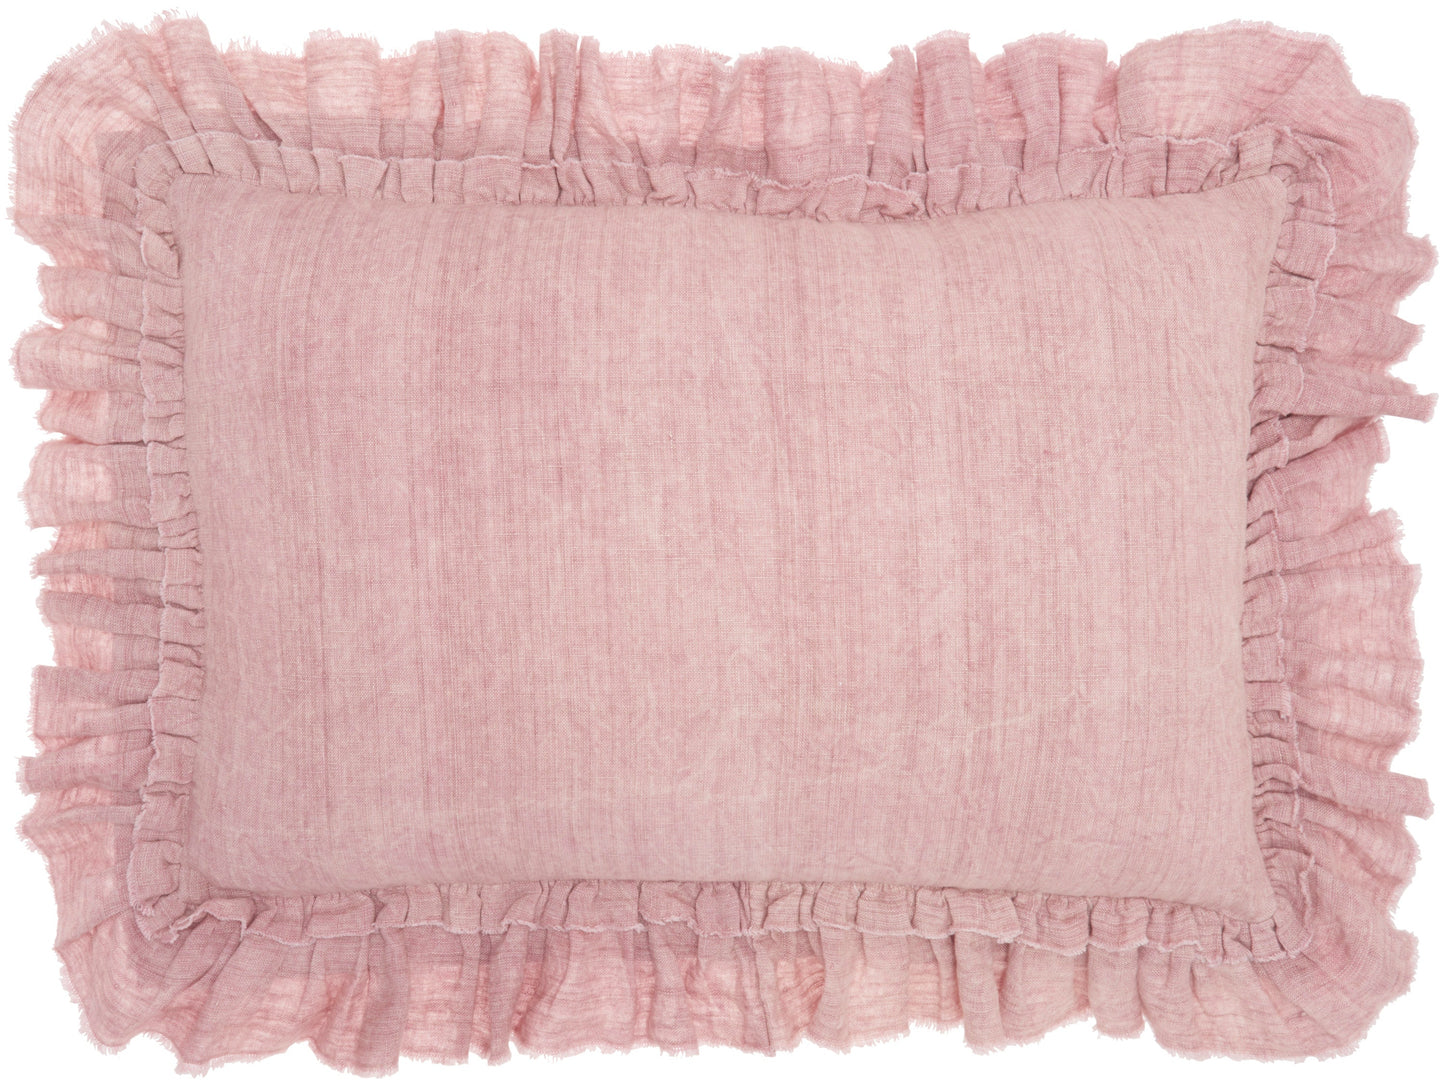 Sofia GE901 Linen Linen Frilled Border Throw Pillow From Mina Victory By Nourison Rugs